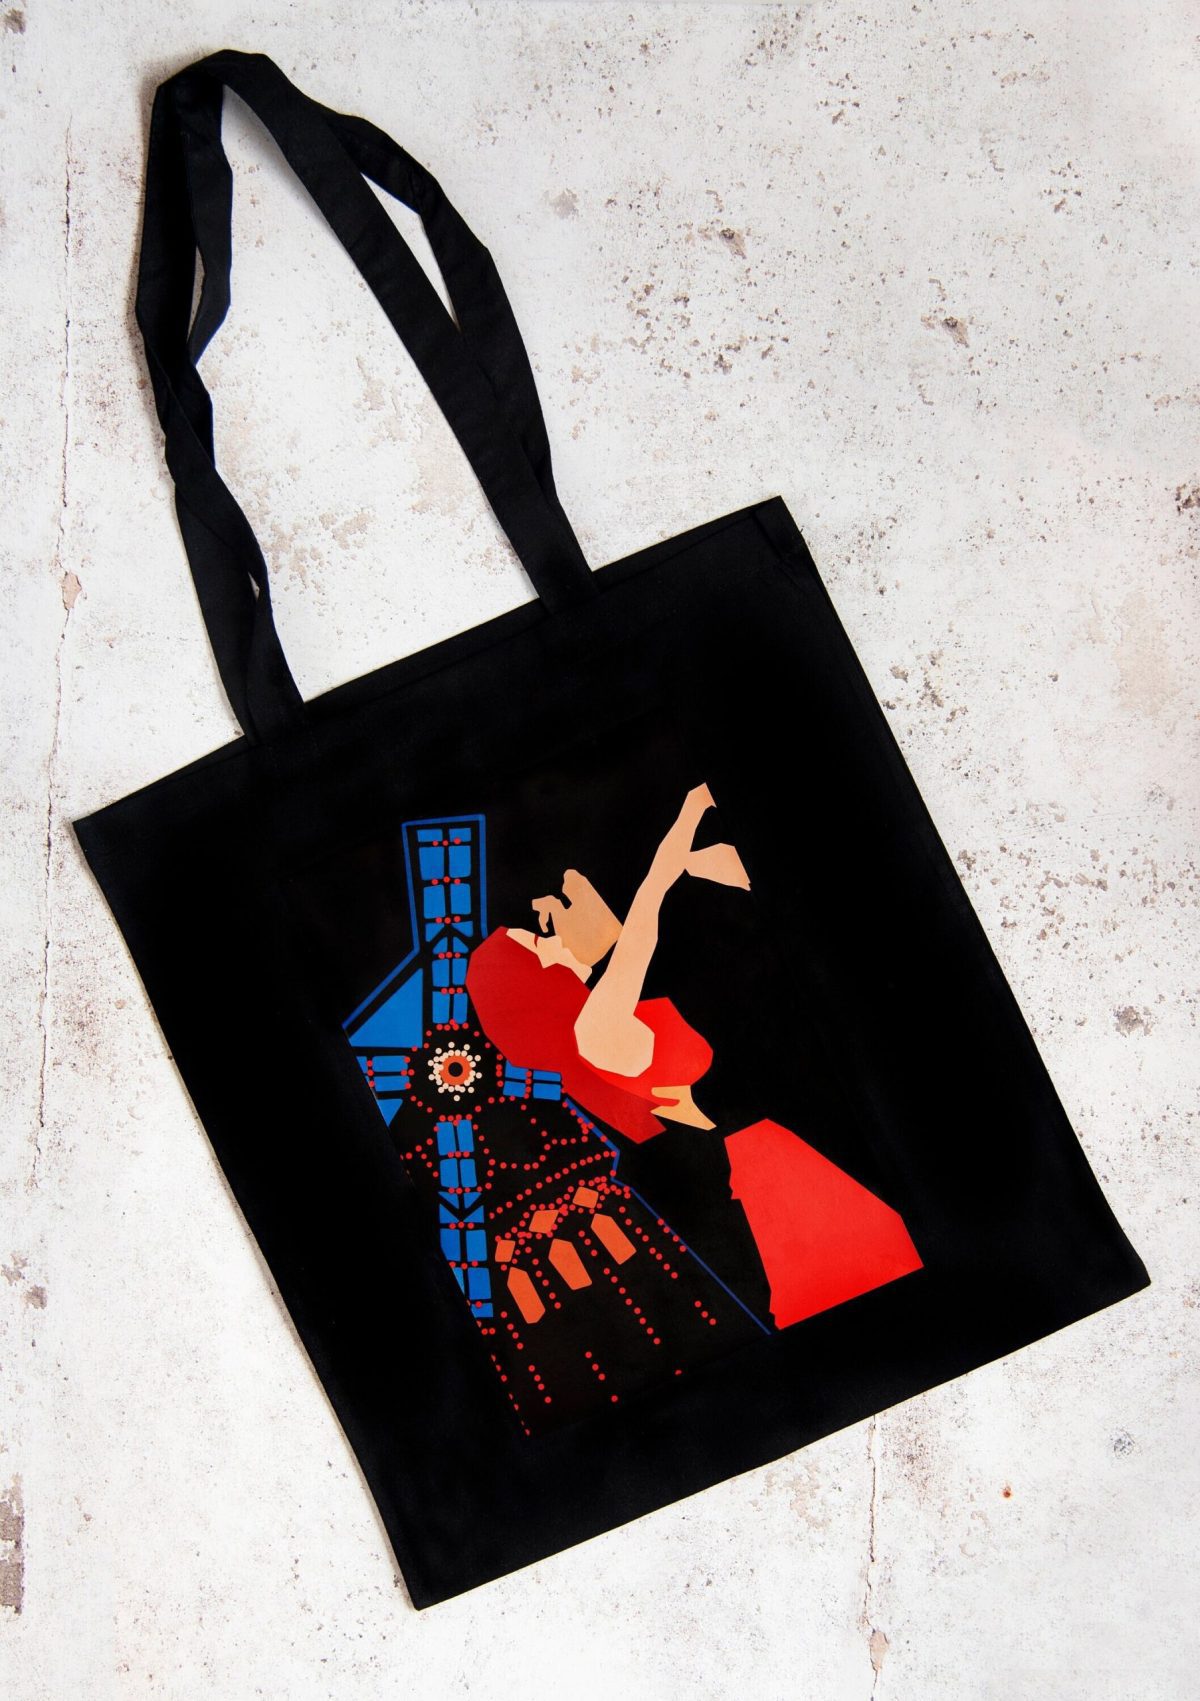 moulin rouge musical black tote bag west end theatre gift halloween scaled